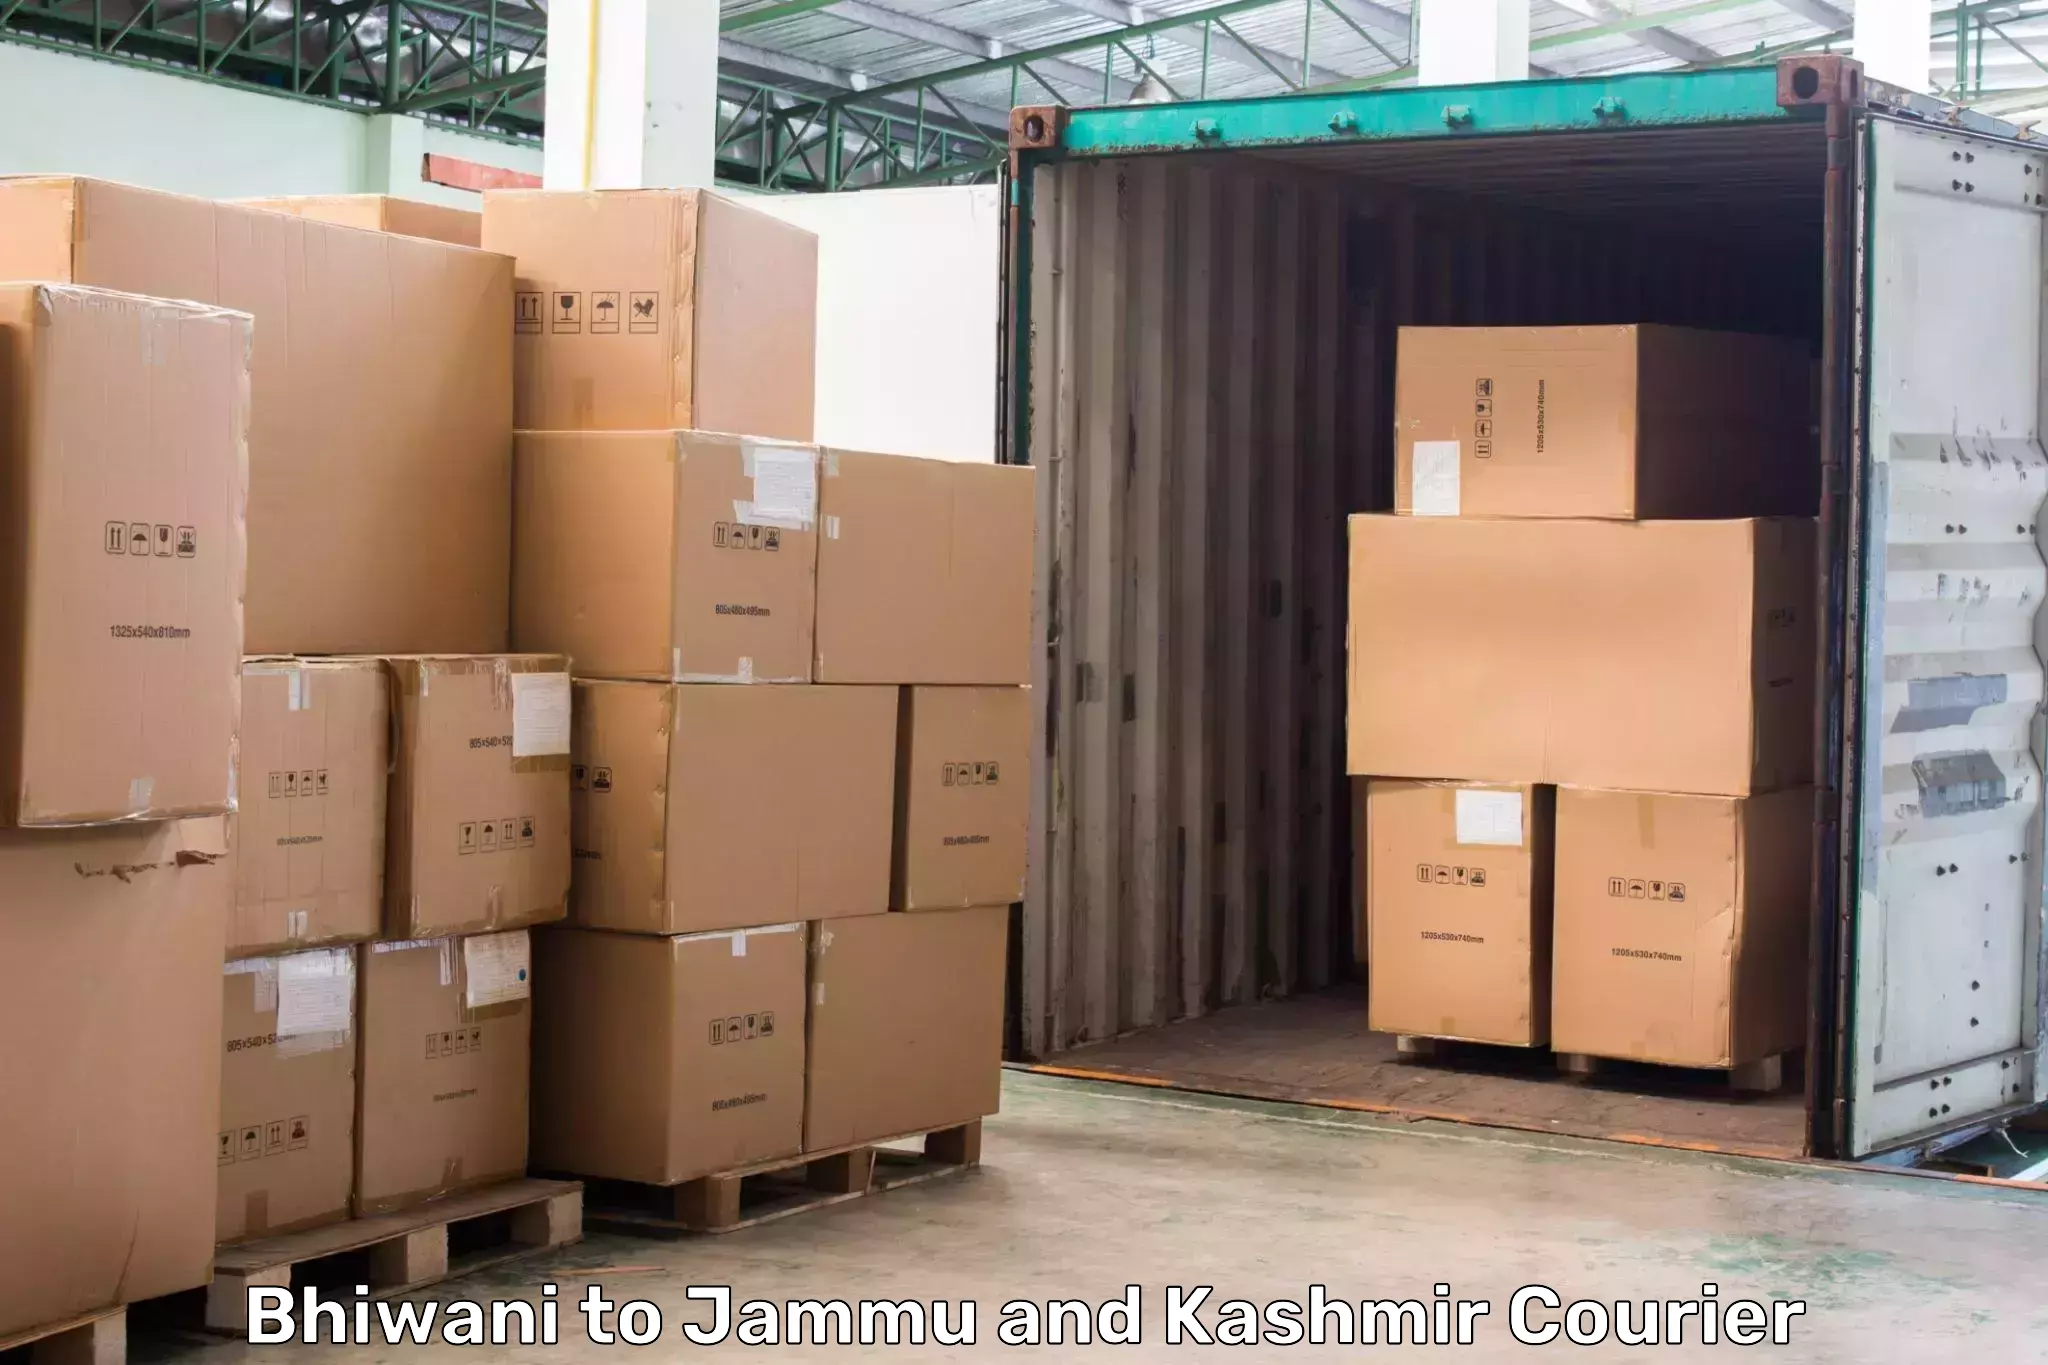 Express delivery capabilities Bhiwani to Jammu and Kashmir